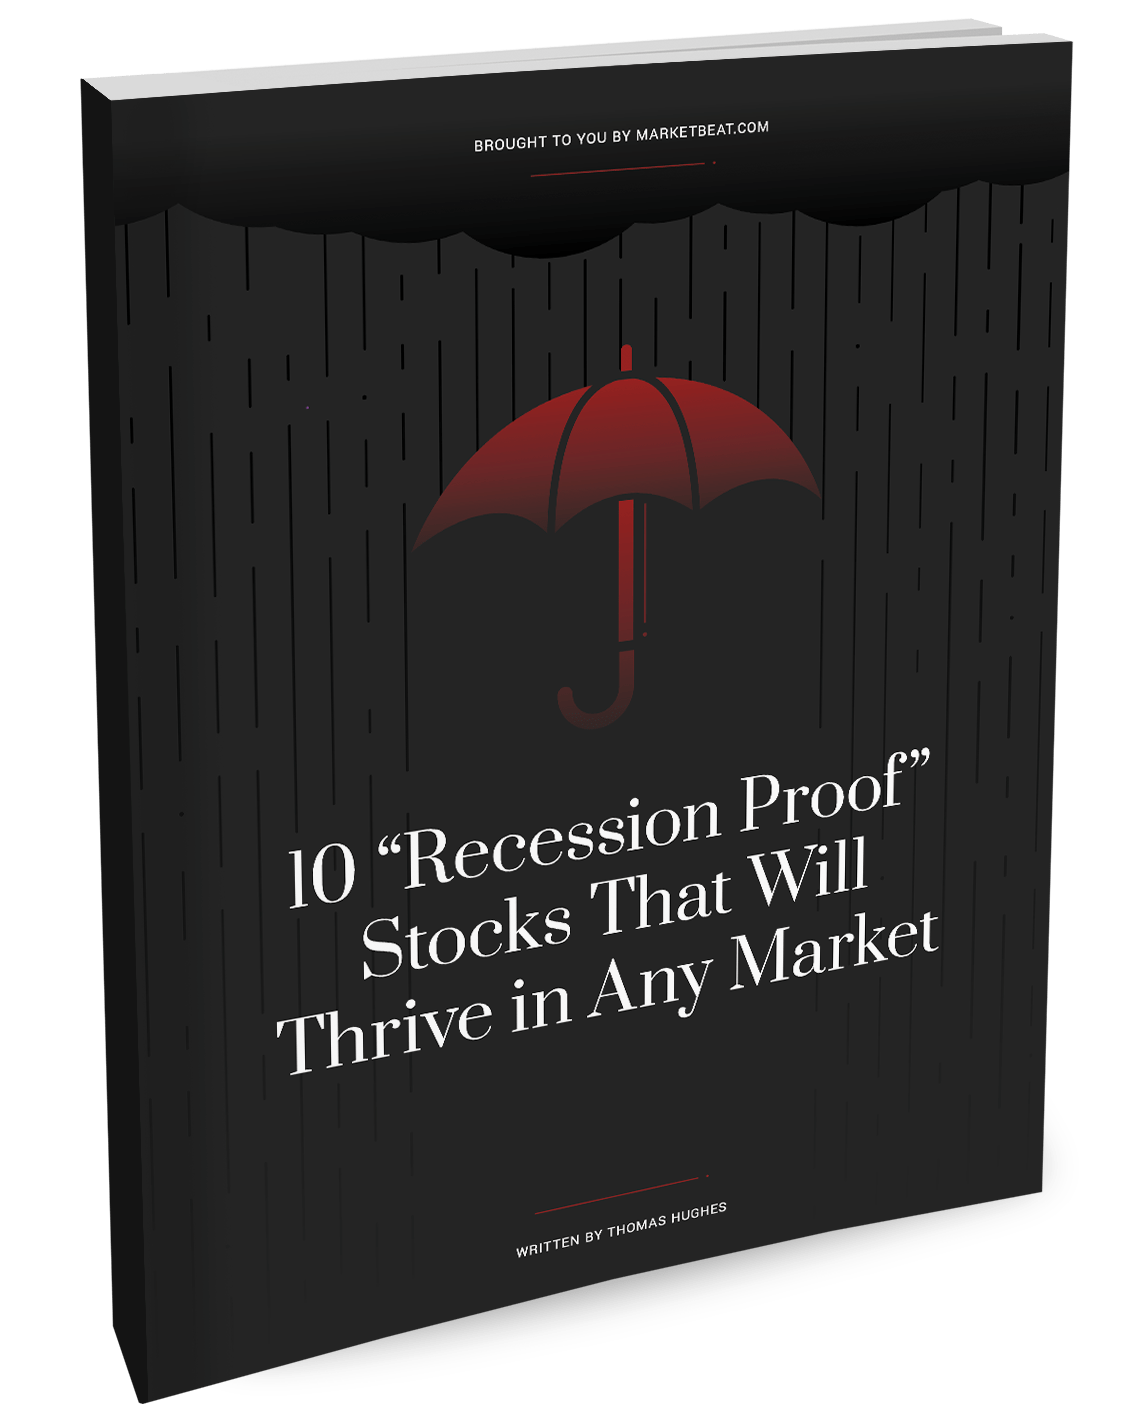 10 "Recession proof" Stocks that will thrive in any market coverage